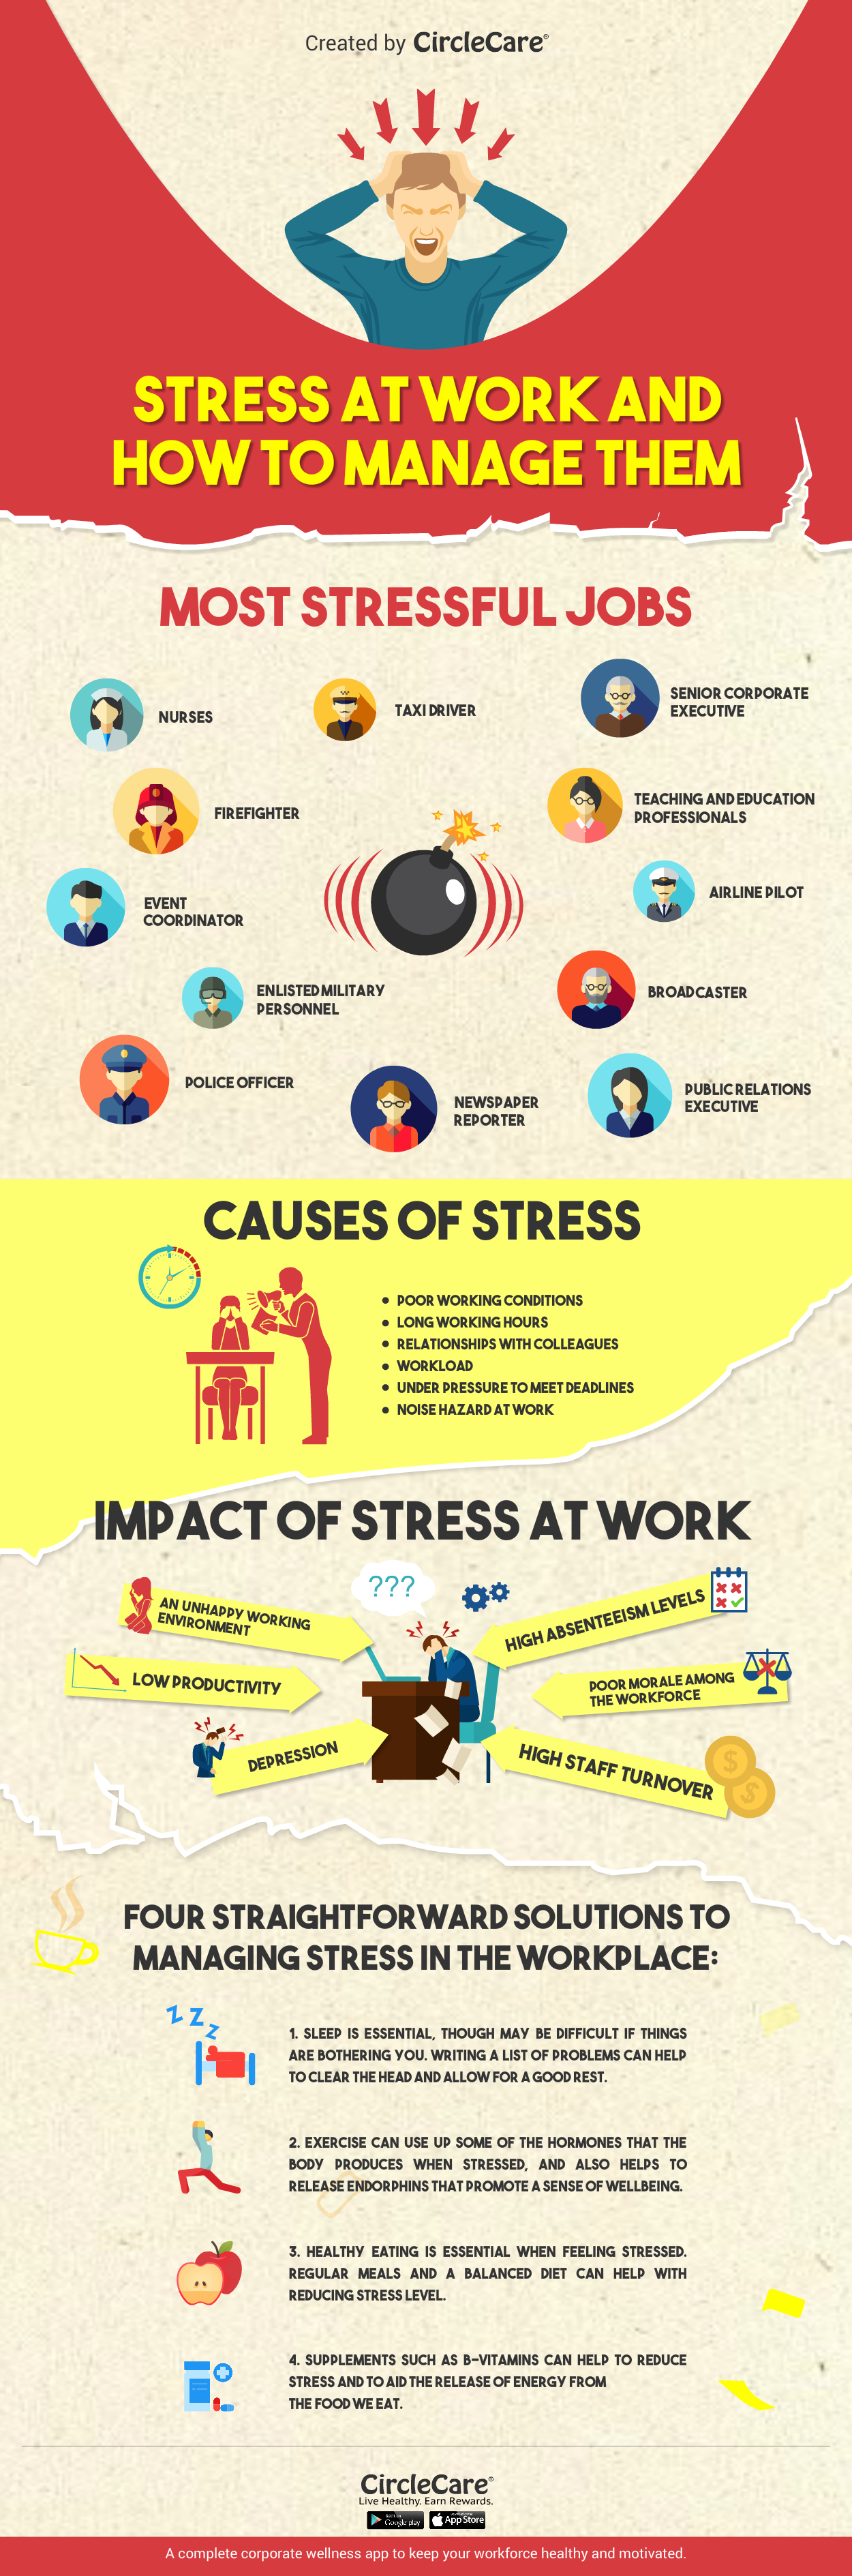 infographic-Stress-at-work-and-how-to-manage-them